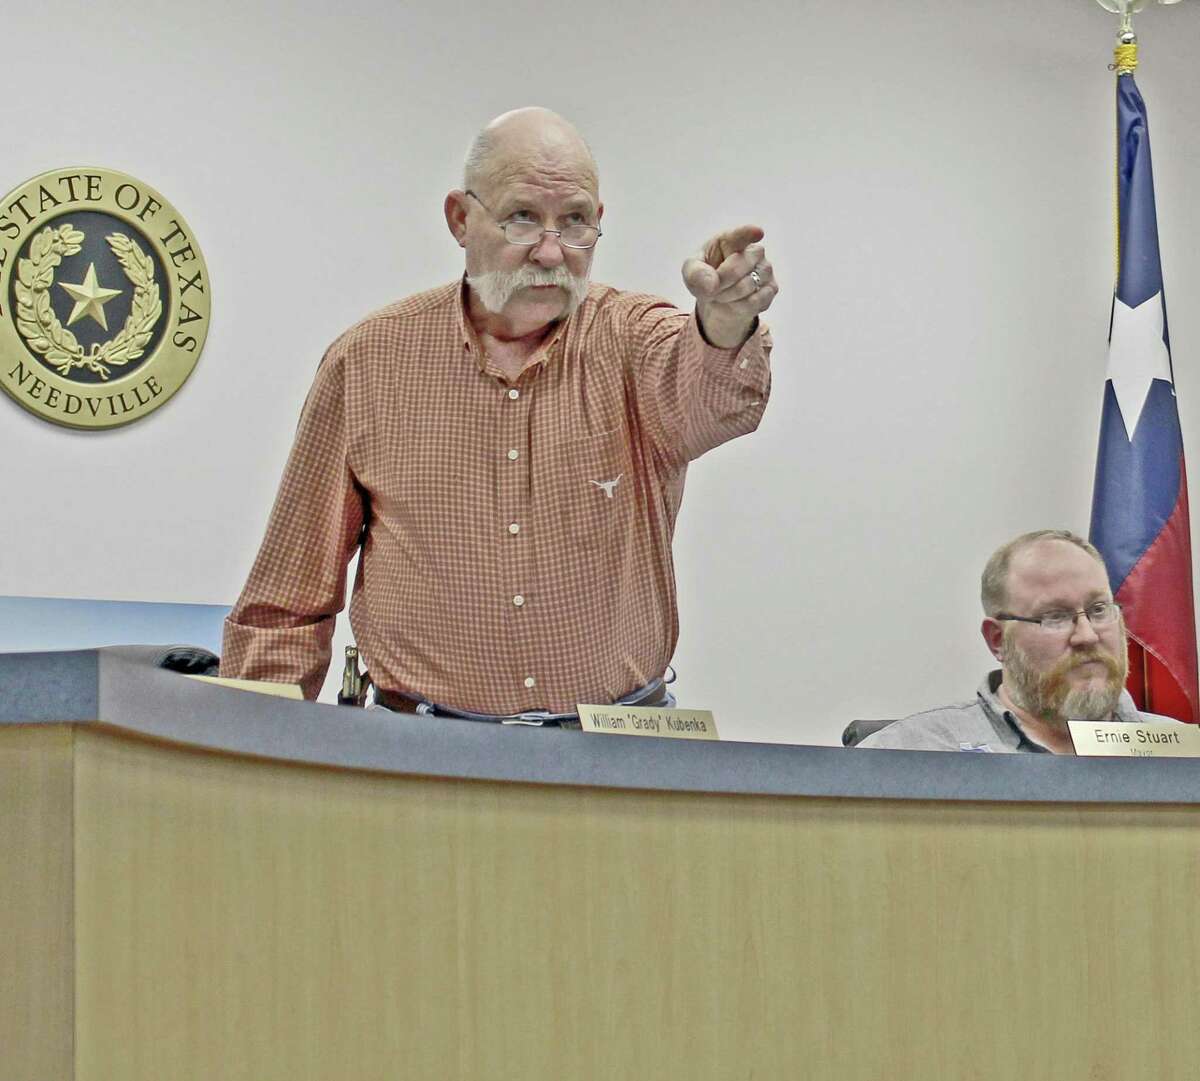 Tempers flared at a recent Needville City Council meeting during discussions over a lawsuit recently filed against the city temporarily blocking plans to demolish the city’s historic water tower. Mayor Stuart stood and yelled for police officers to escort a woman from the meeting after she spoke out from the audience. “You people think I am playing up here?” Stuart said, shaking his finger at the standing-room only crowd. A trial is scheduled Oct. 9 to decide the fate of the water tower.